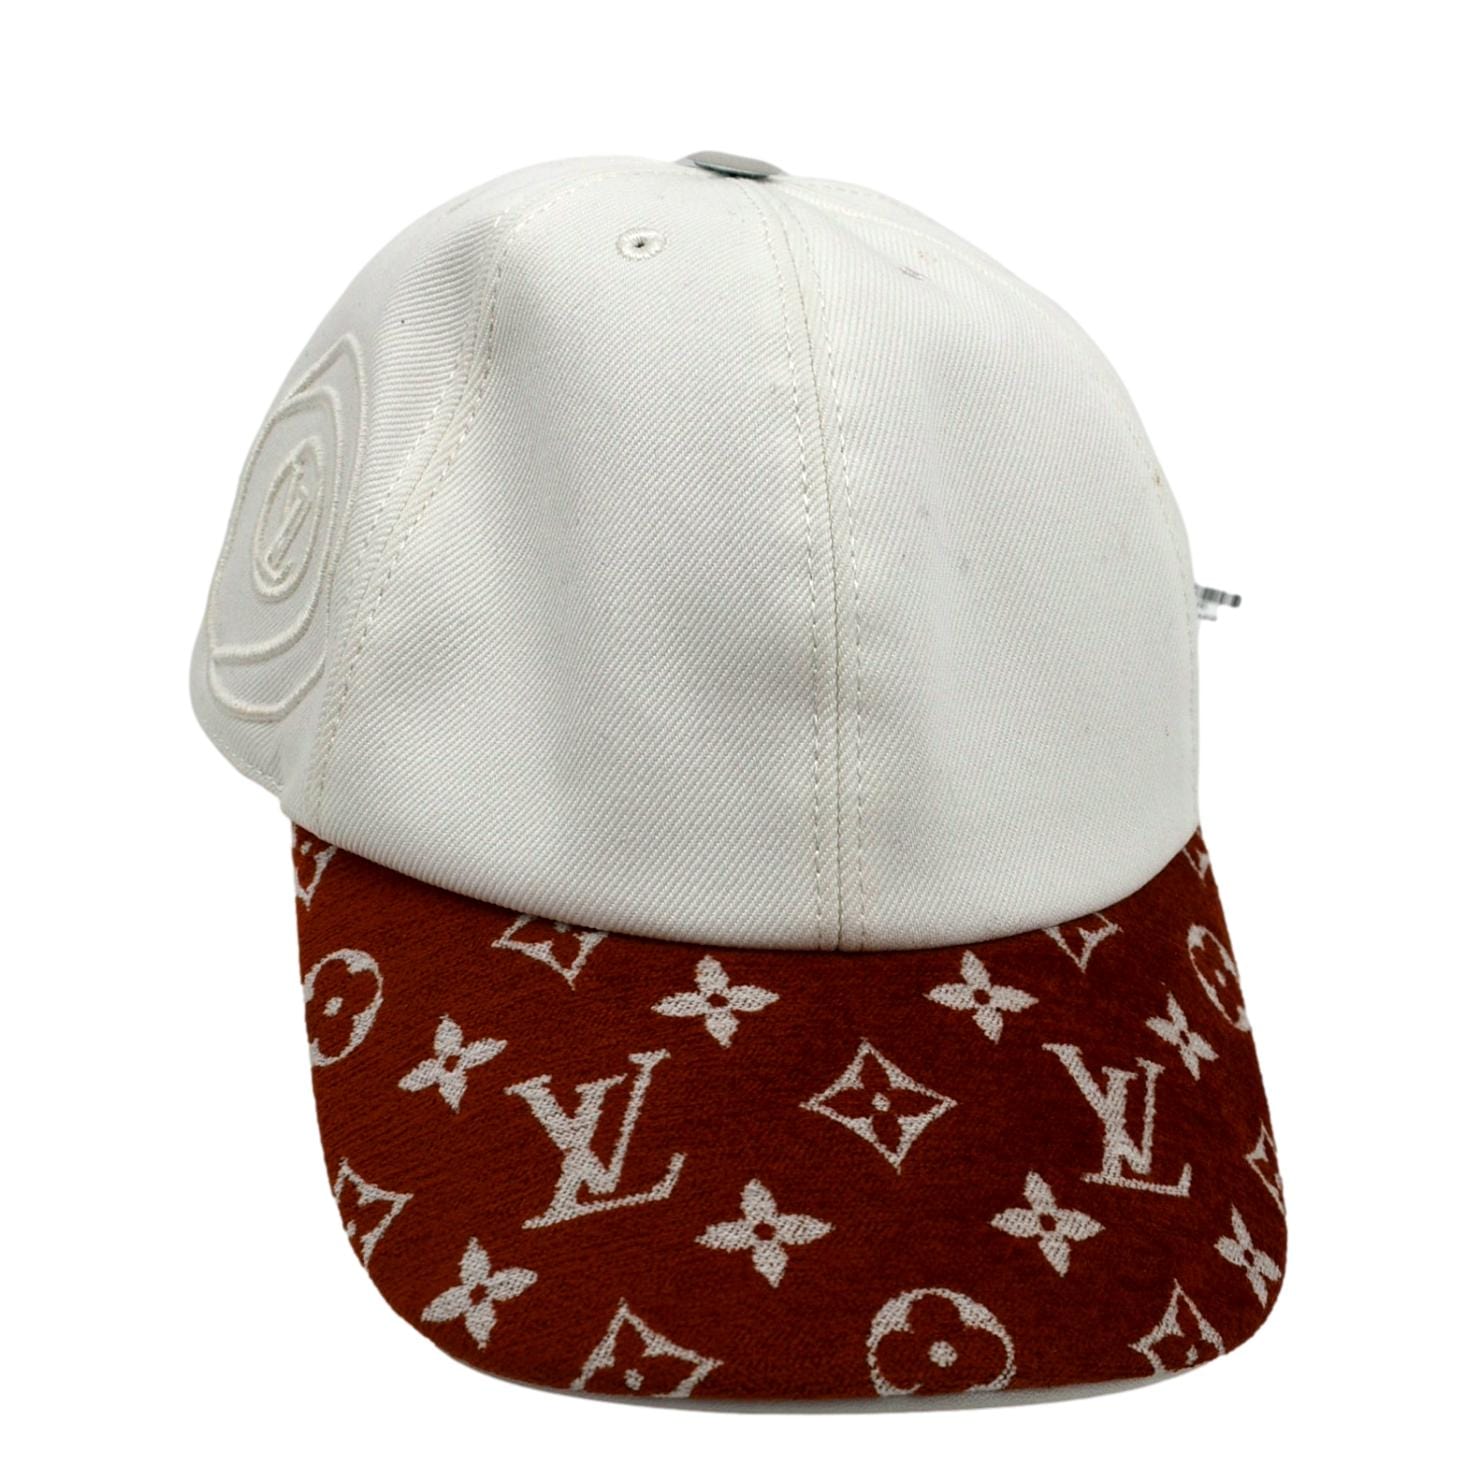 LV Leather Caps **** See Description When Ordering***